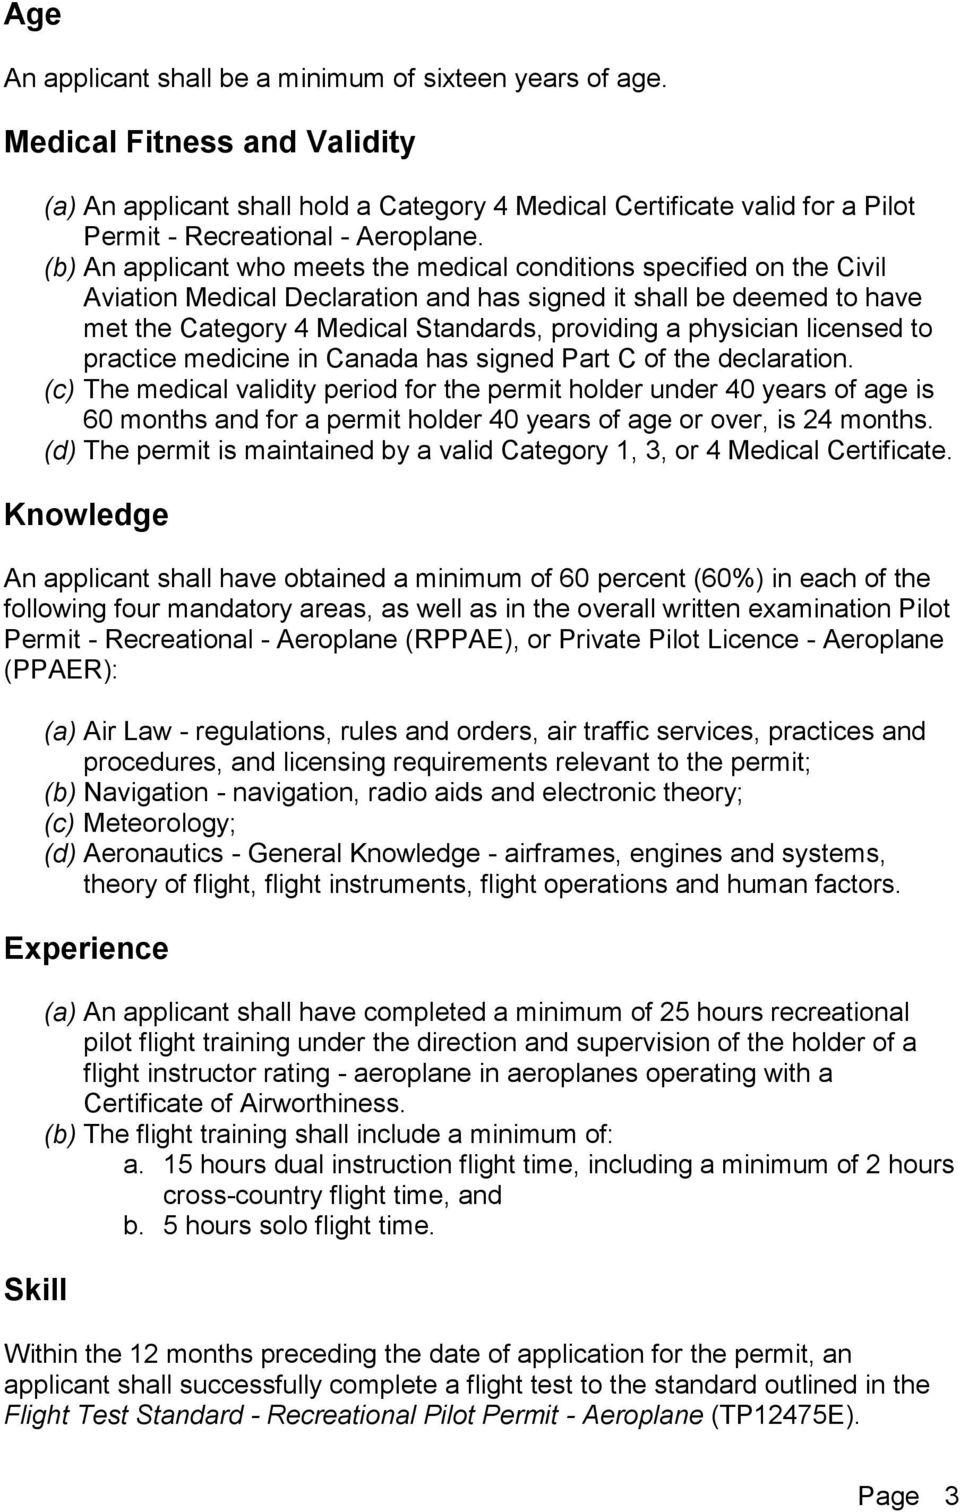 (b) An applicant who meets the medical conditions specified on the Civil Aviation Medical Declaration and has signed it shall be deemed to have met the Category 4 Medical Standards, providing a